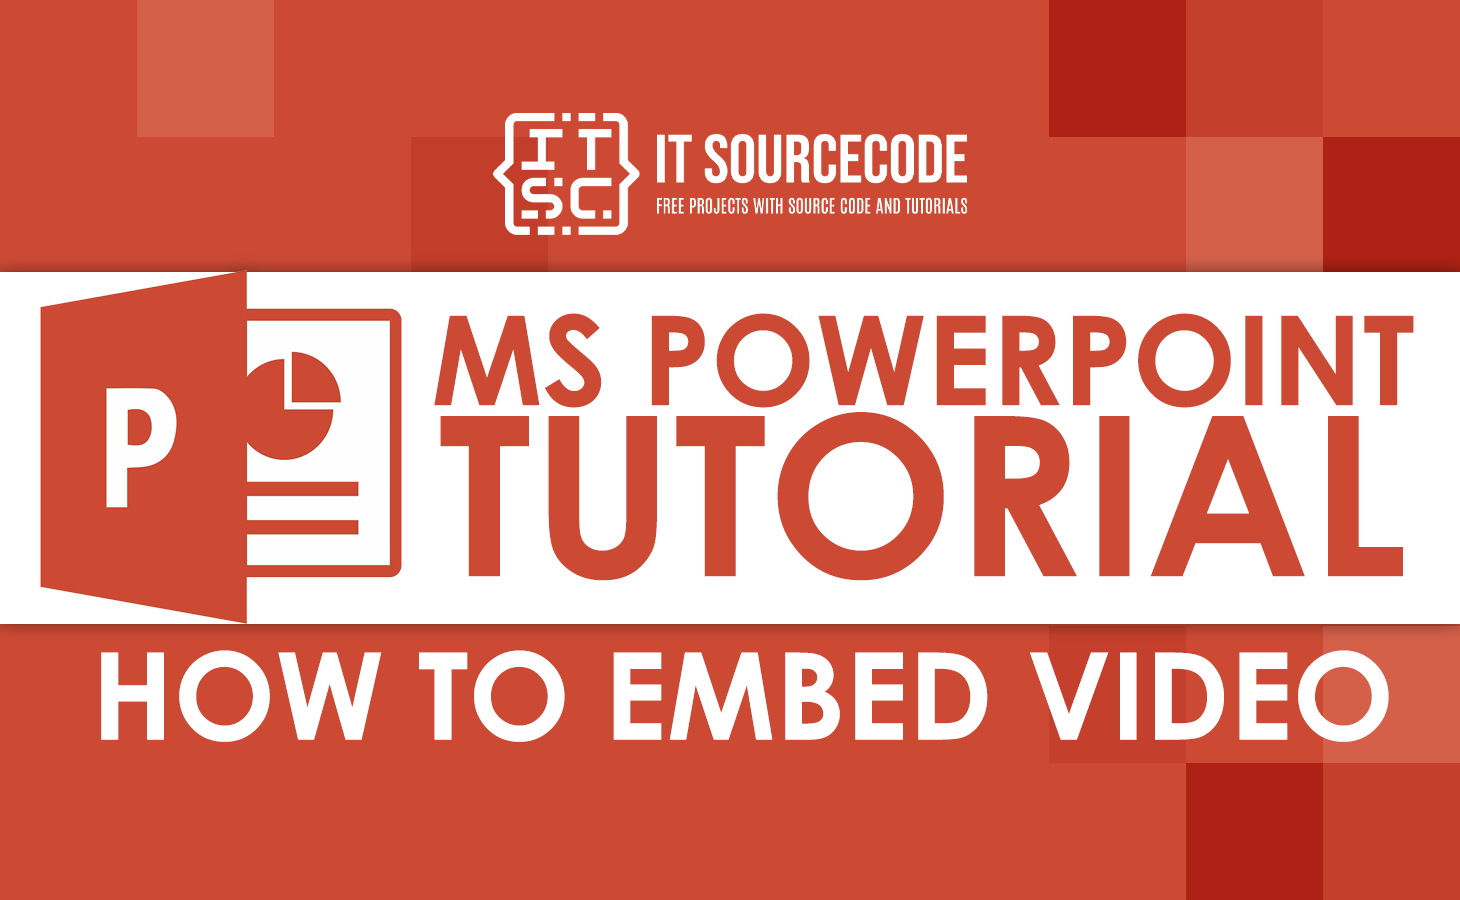 MS Powerpoint Tutorial how to embed video